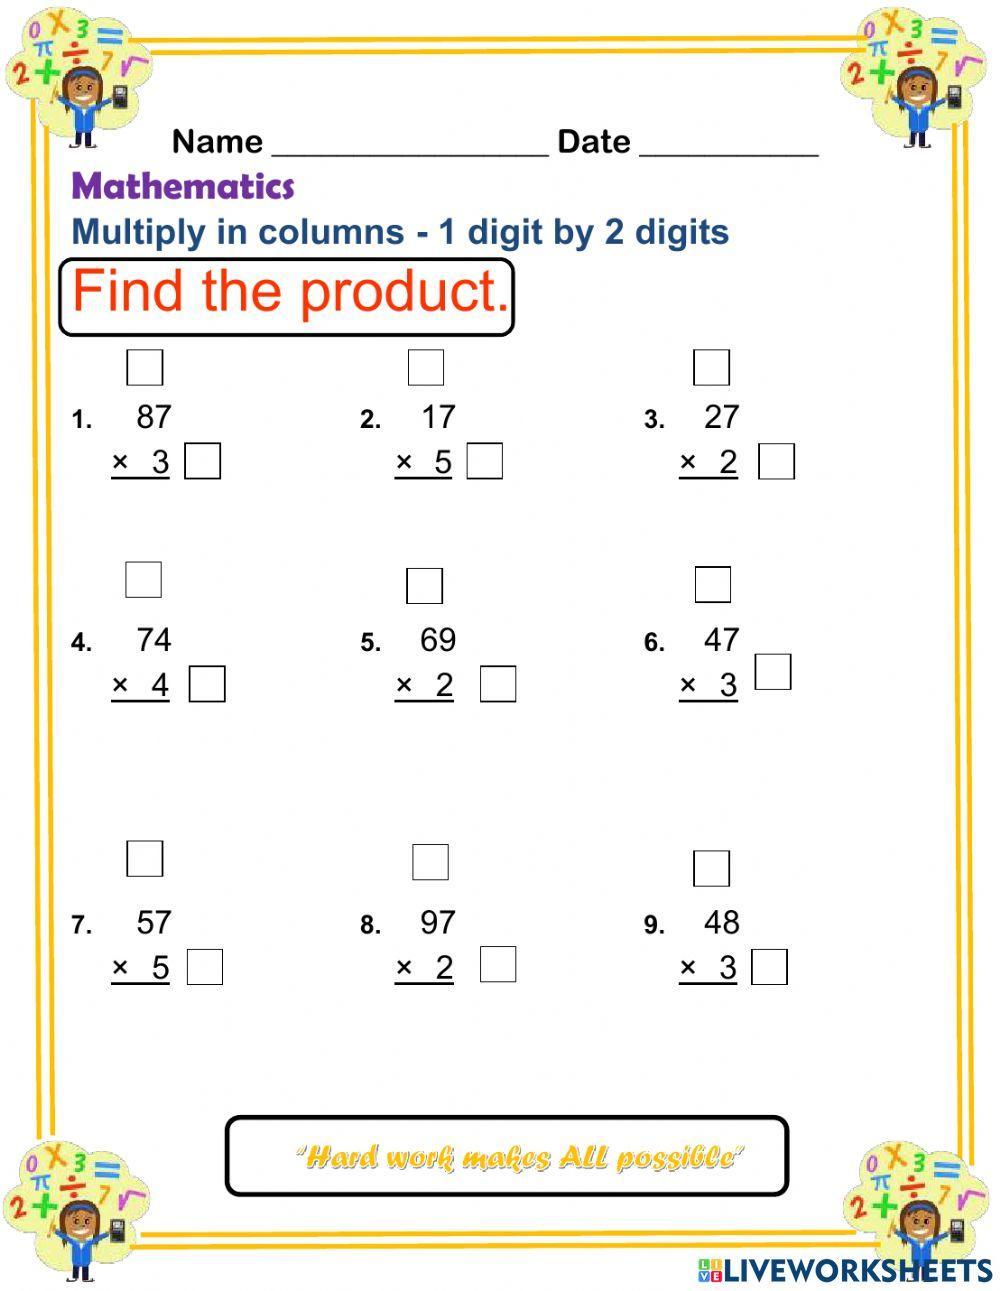 Multiplication of 2 digits by 1 digit